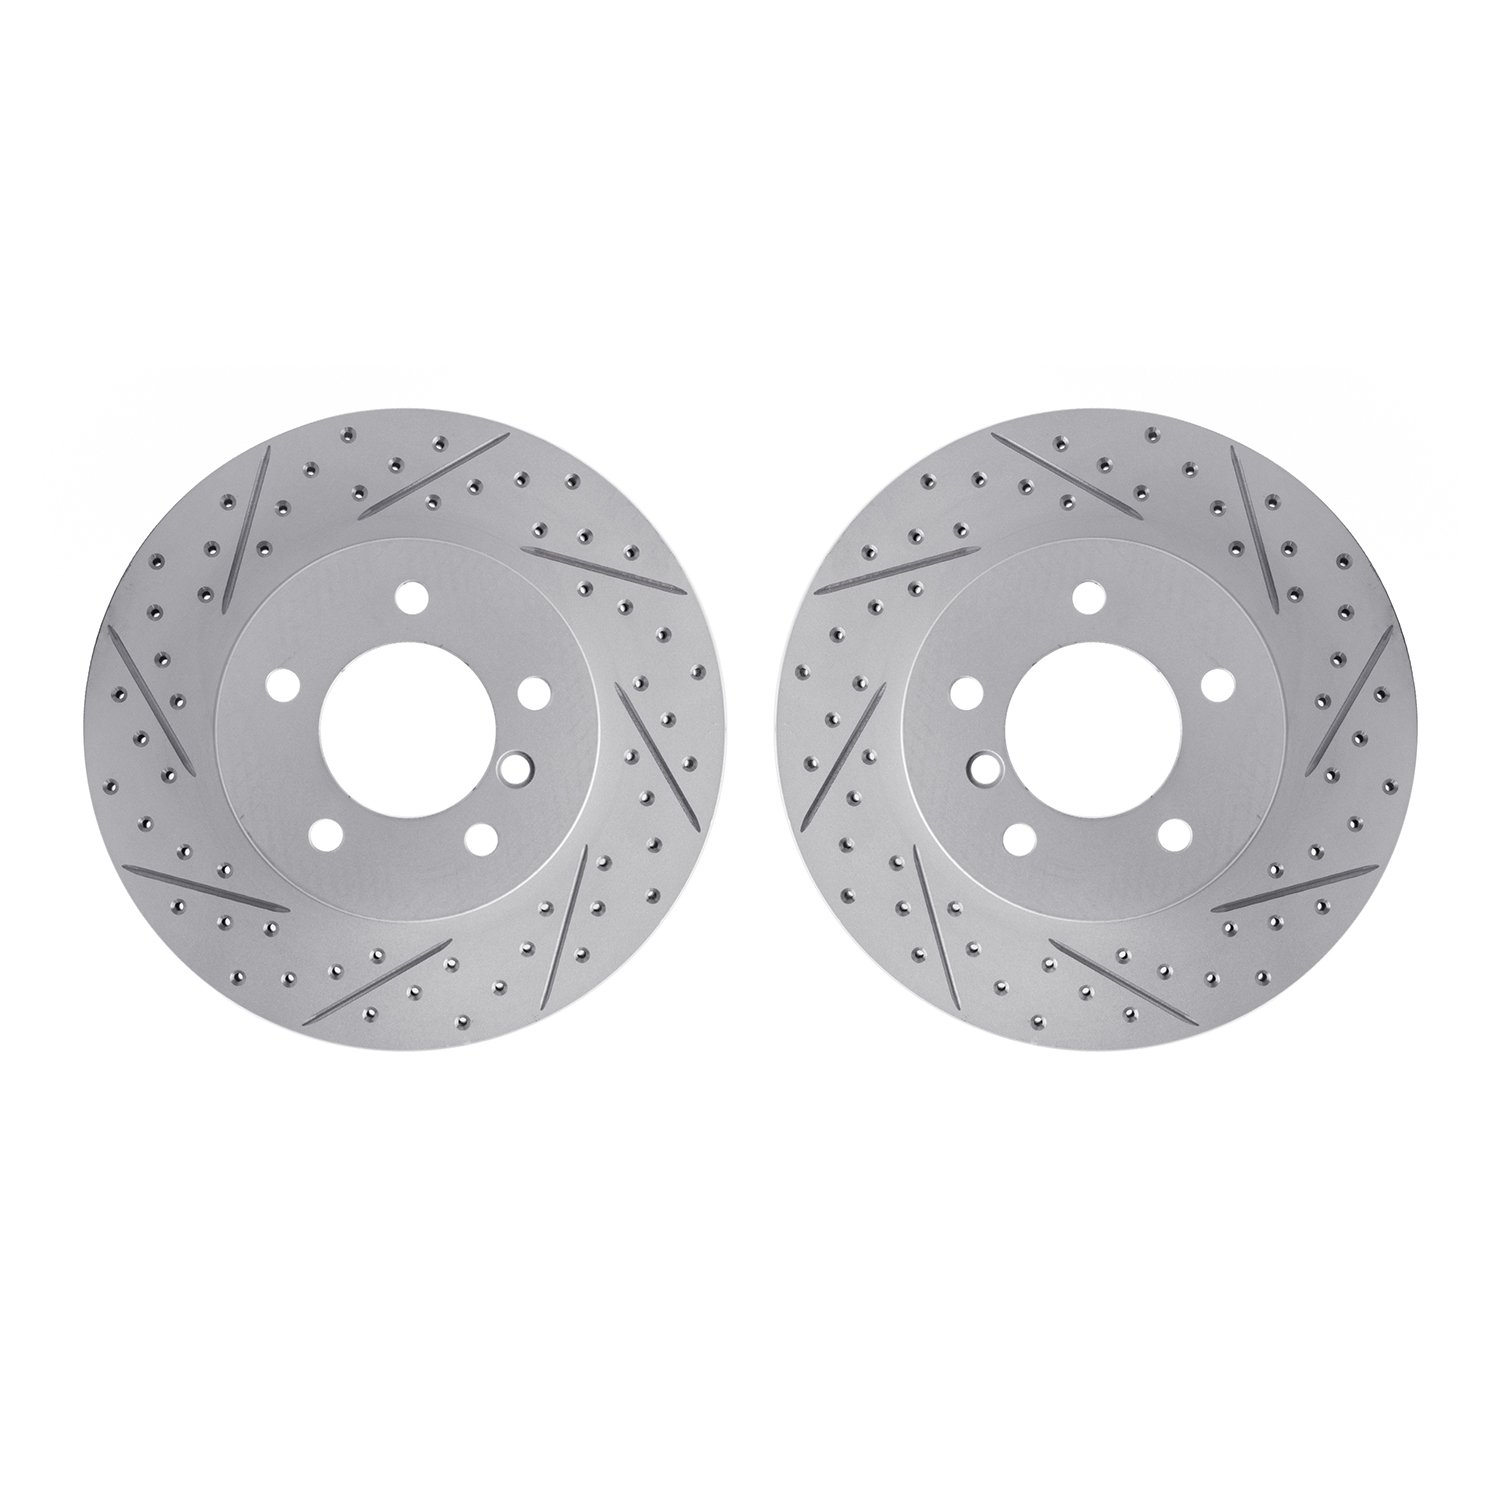 2002-31010 Geoperformance Drilled/Slotted Brake Rotors, 1999-2008 BMW, Position: Front